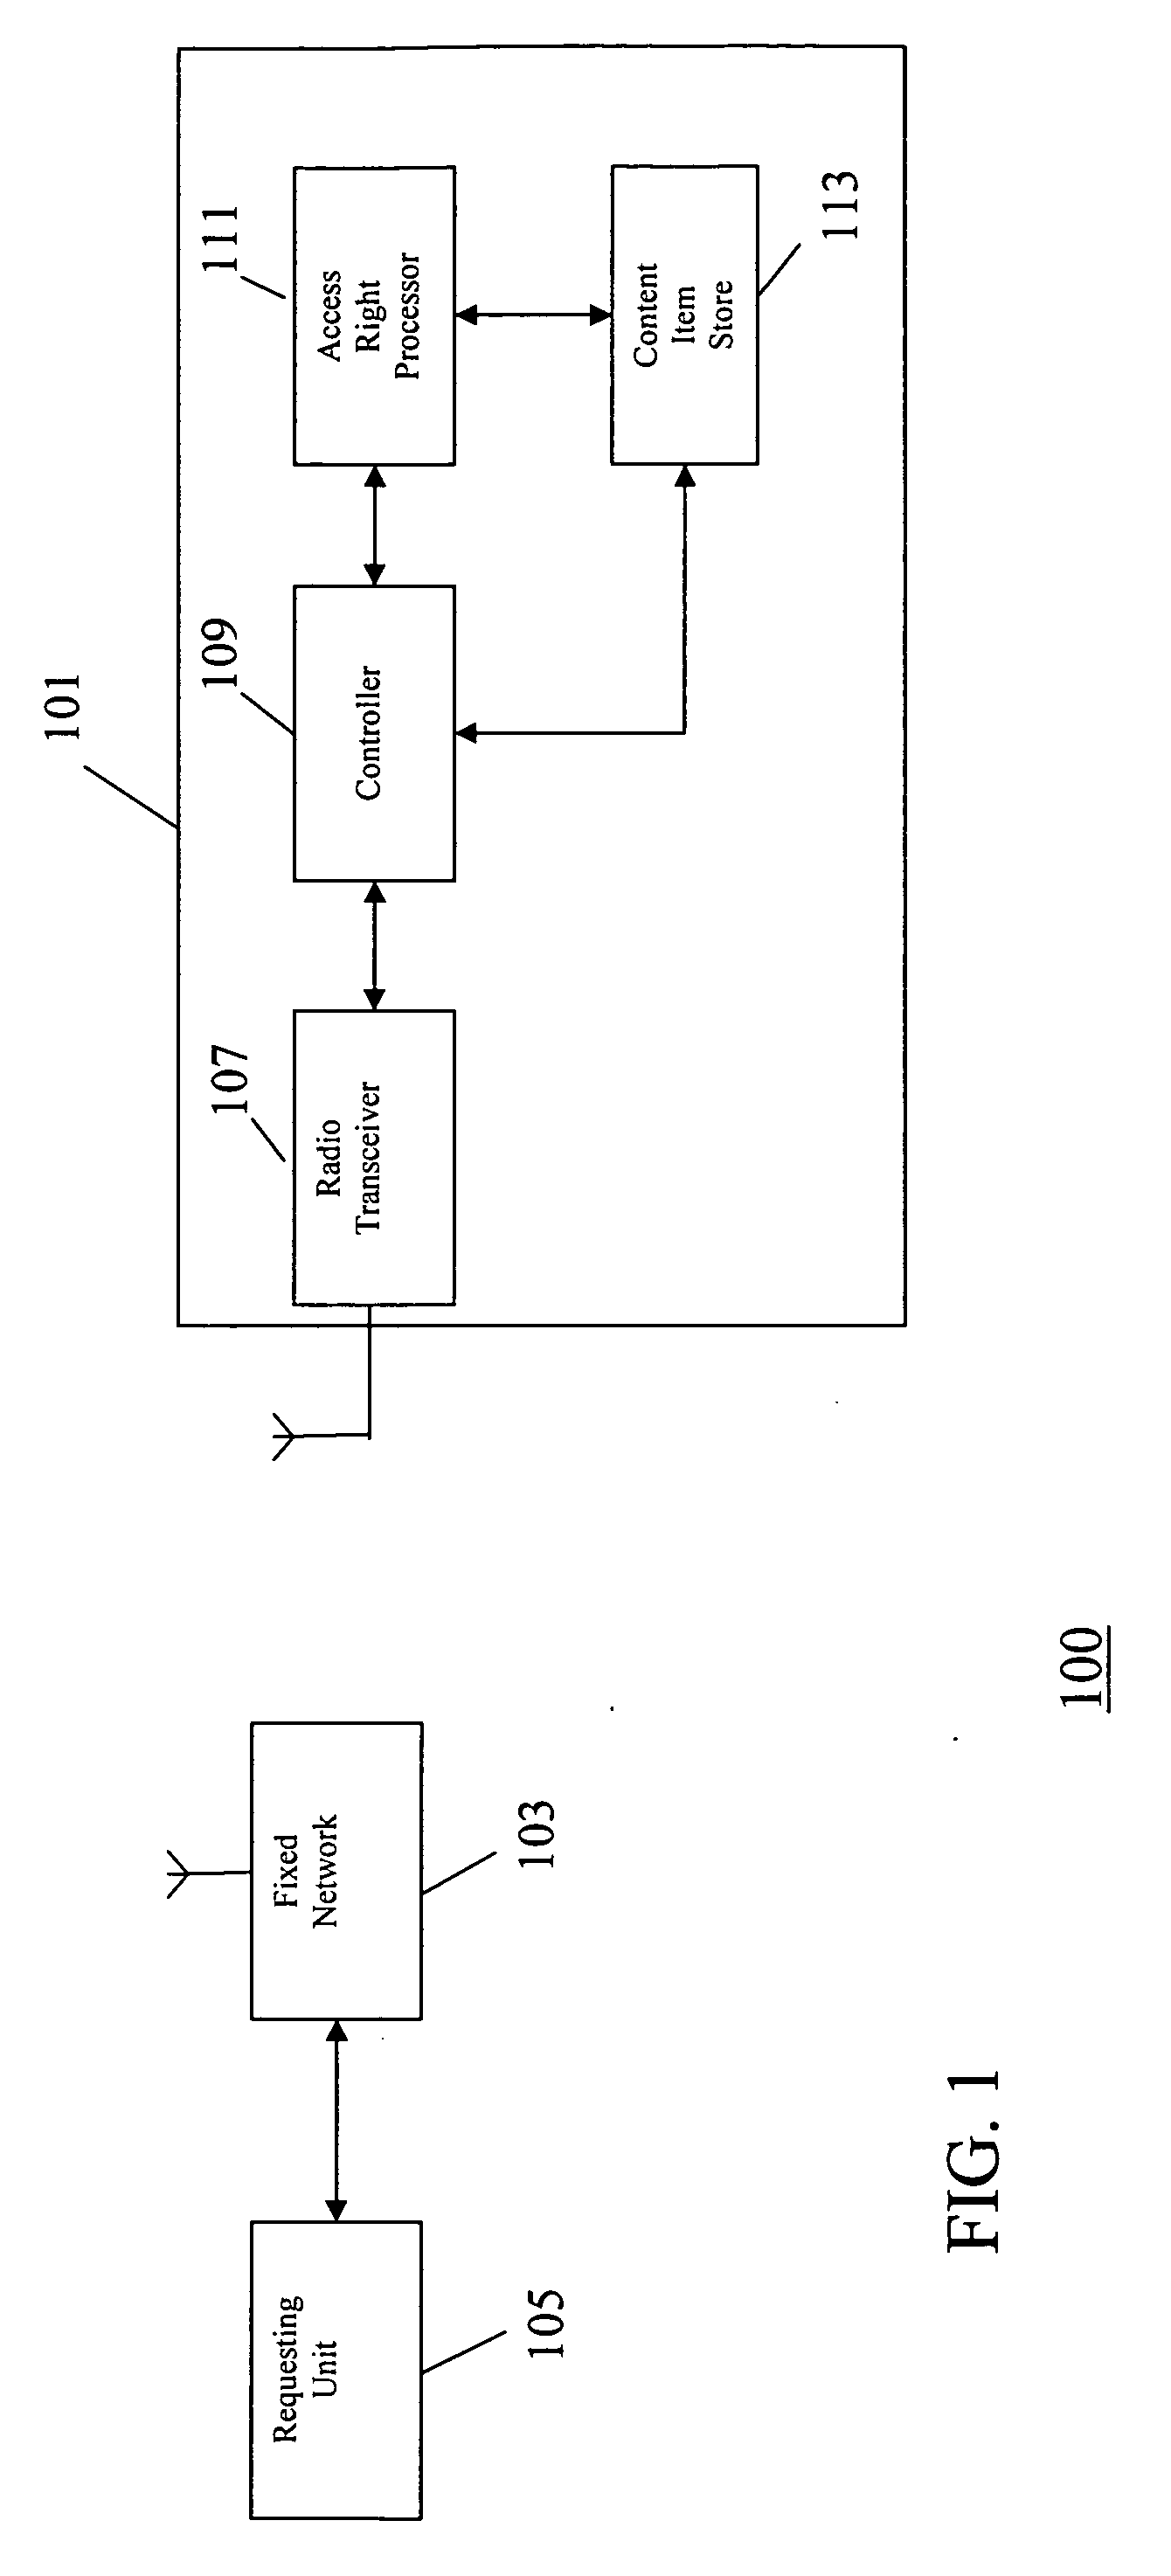 Method and apparatus of determining access rights to content items